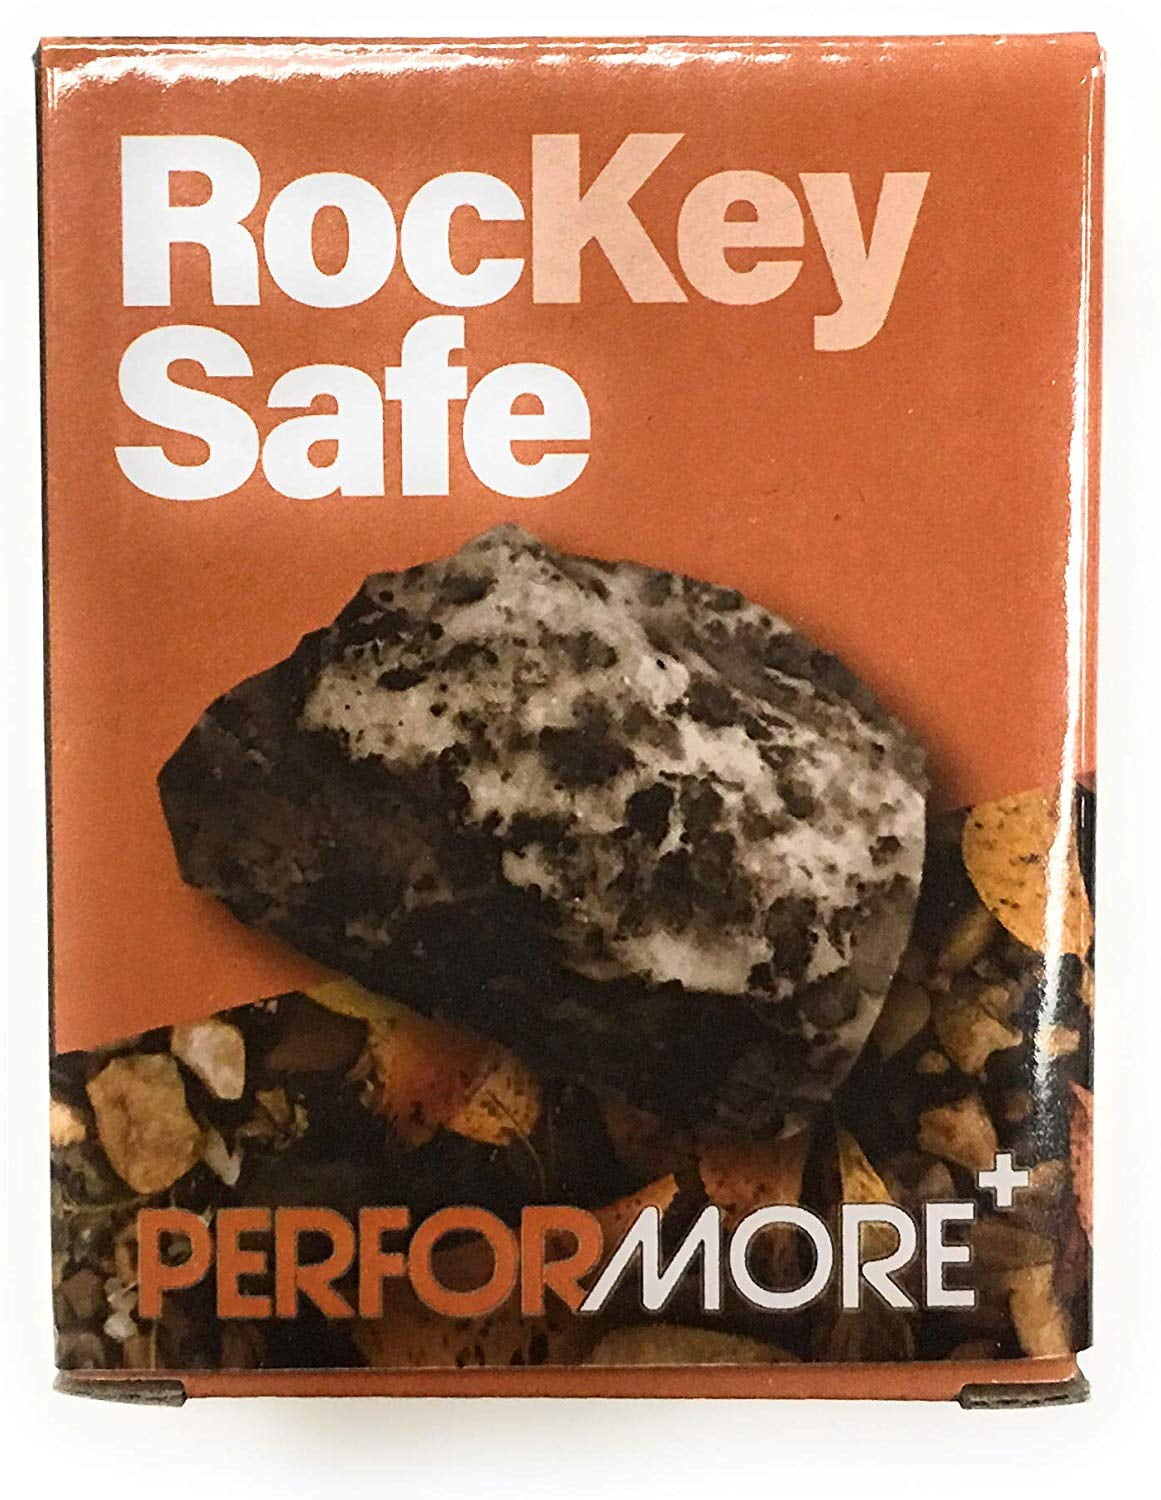 Rockey Safe Hide A Key in Plain Sight in A Real Looking Rock/Stone, Holds Standard Sized Spare Keys